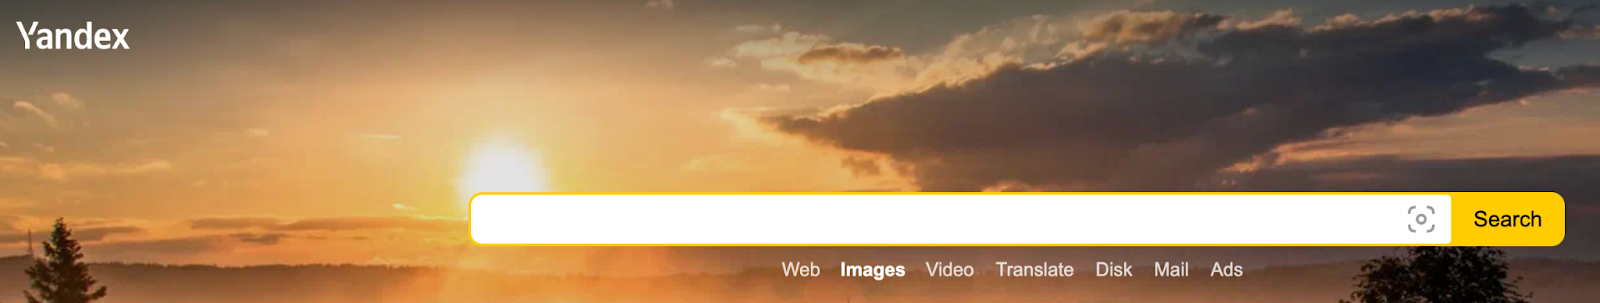 image search with Yandex